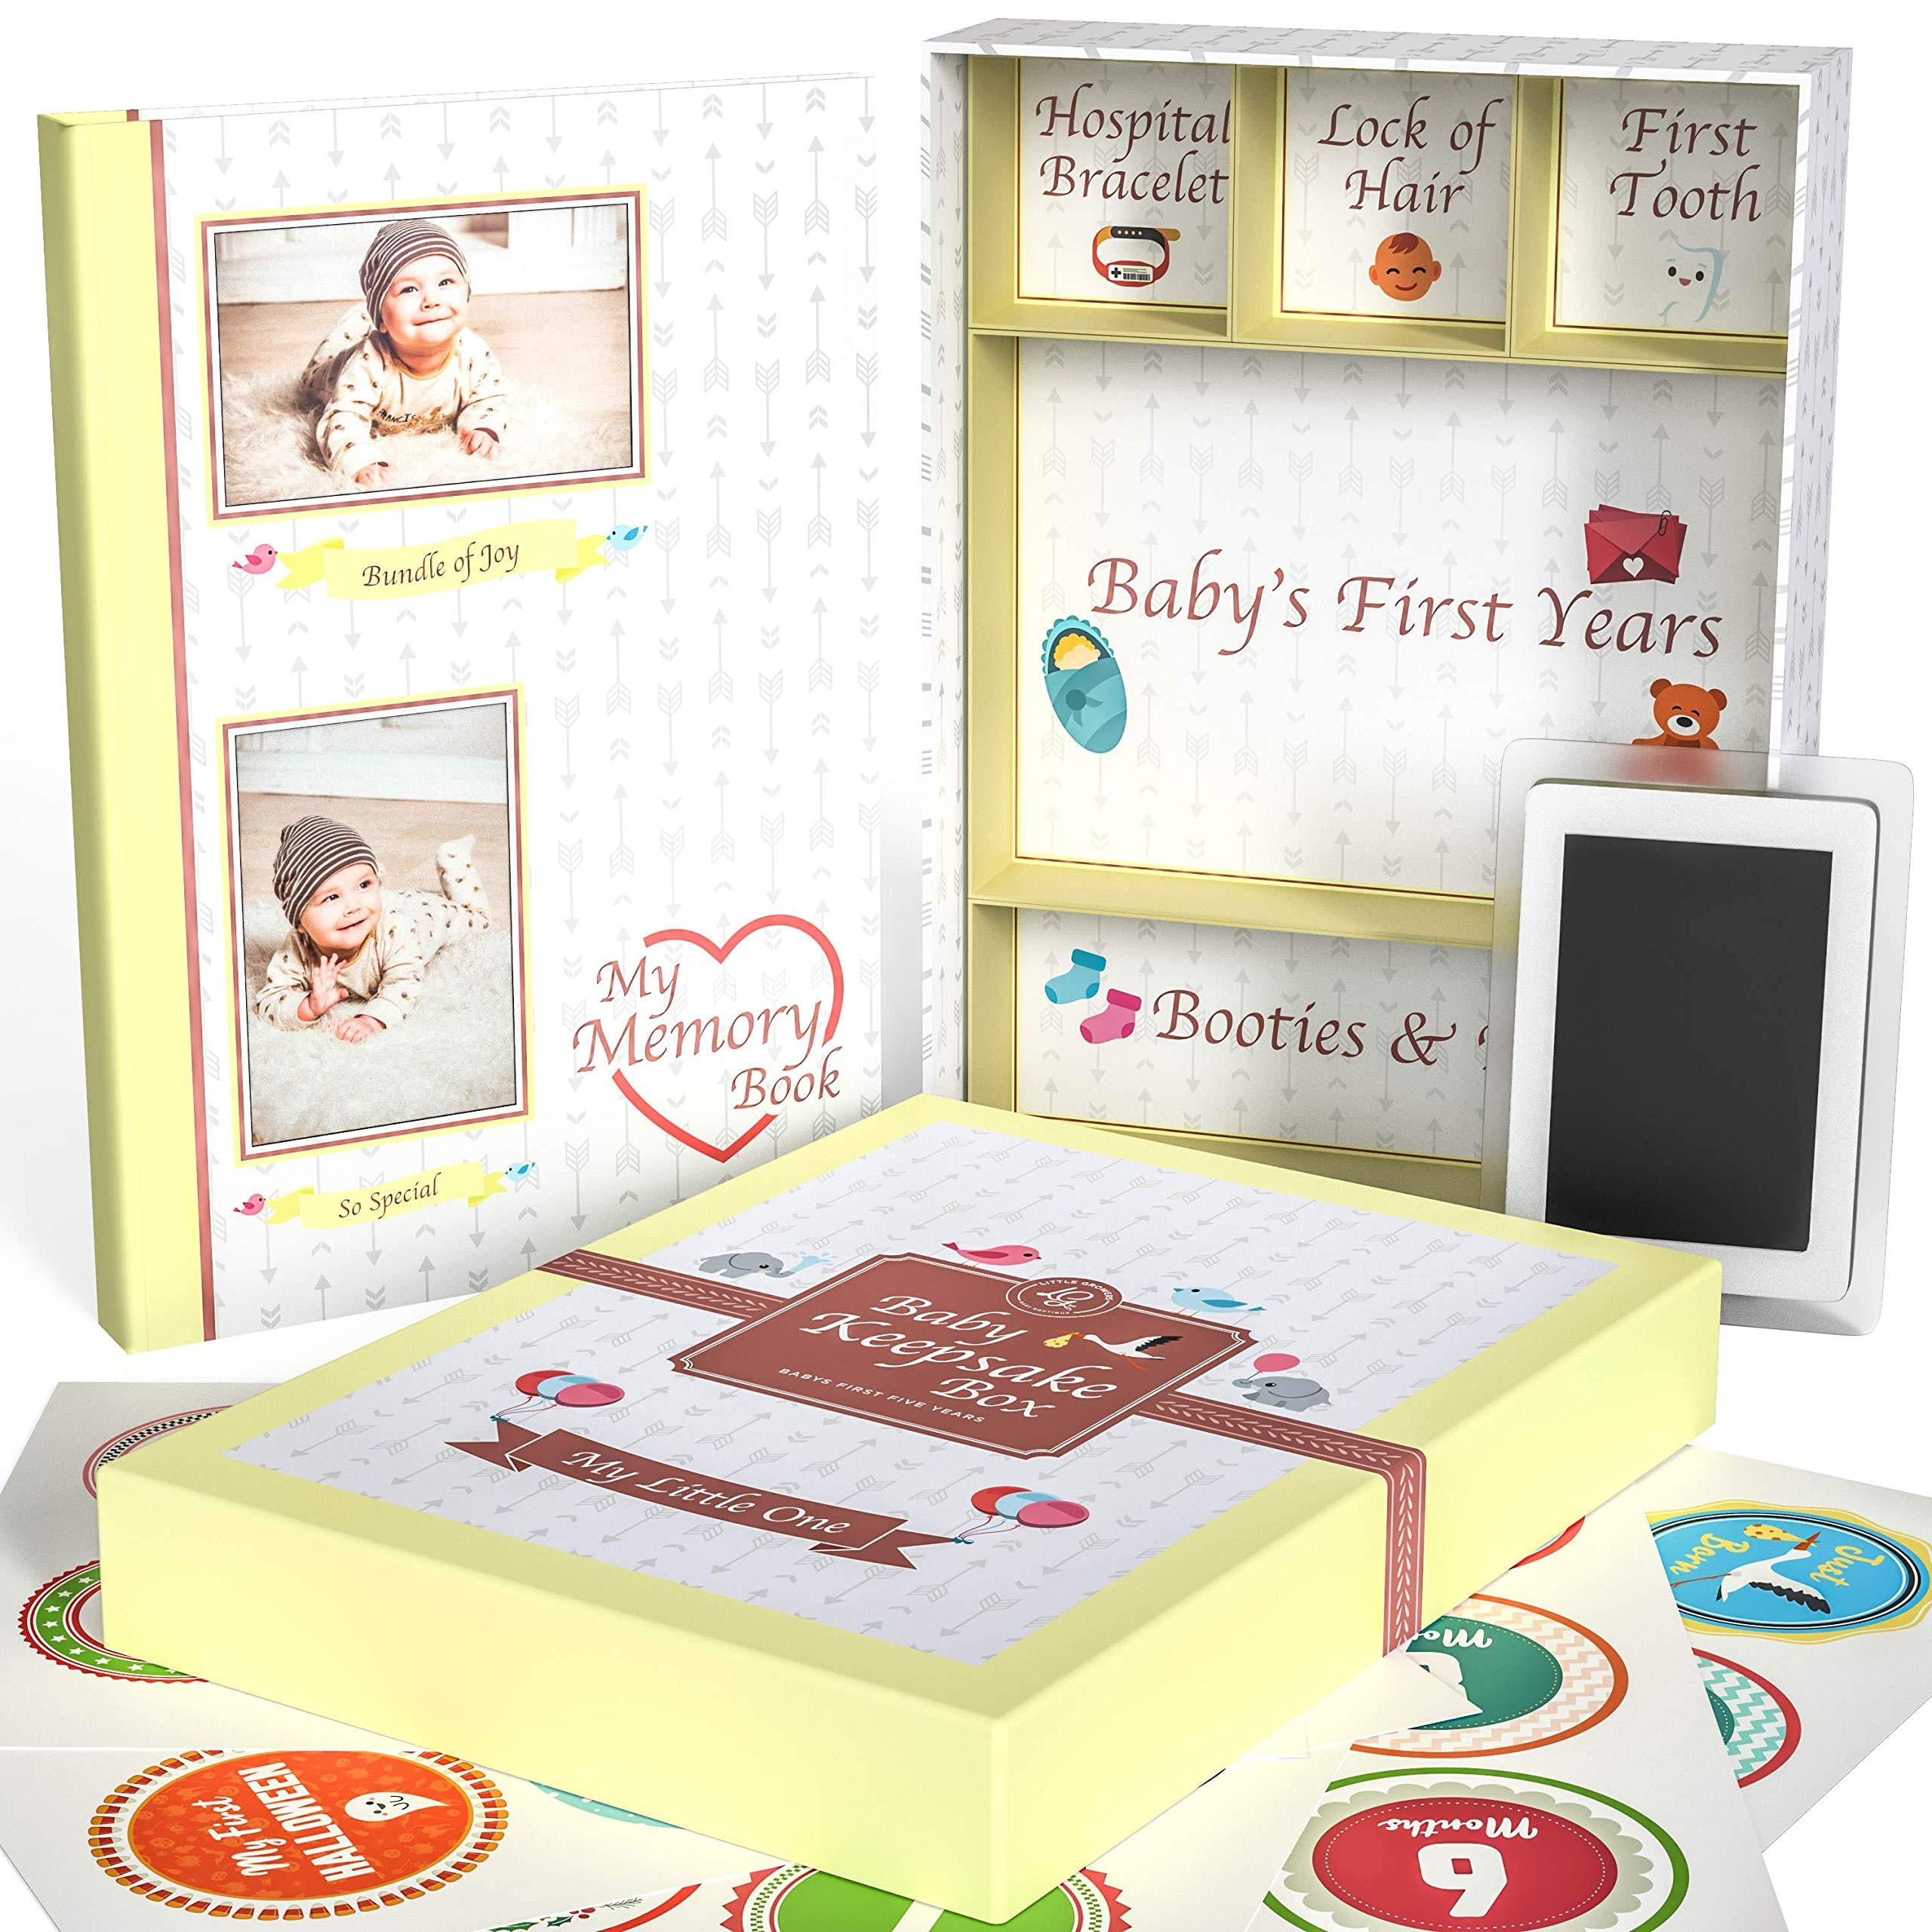 Modern baby book Gender Neutral Milestones and Growth from Pregnancy to First 5 Years Track Special Moments First baby scrapbook for Keepsake My Little Heart Baby Memory Book 